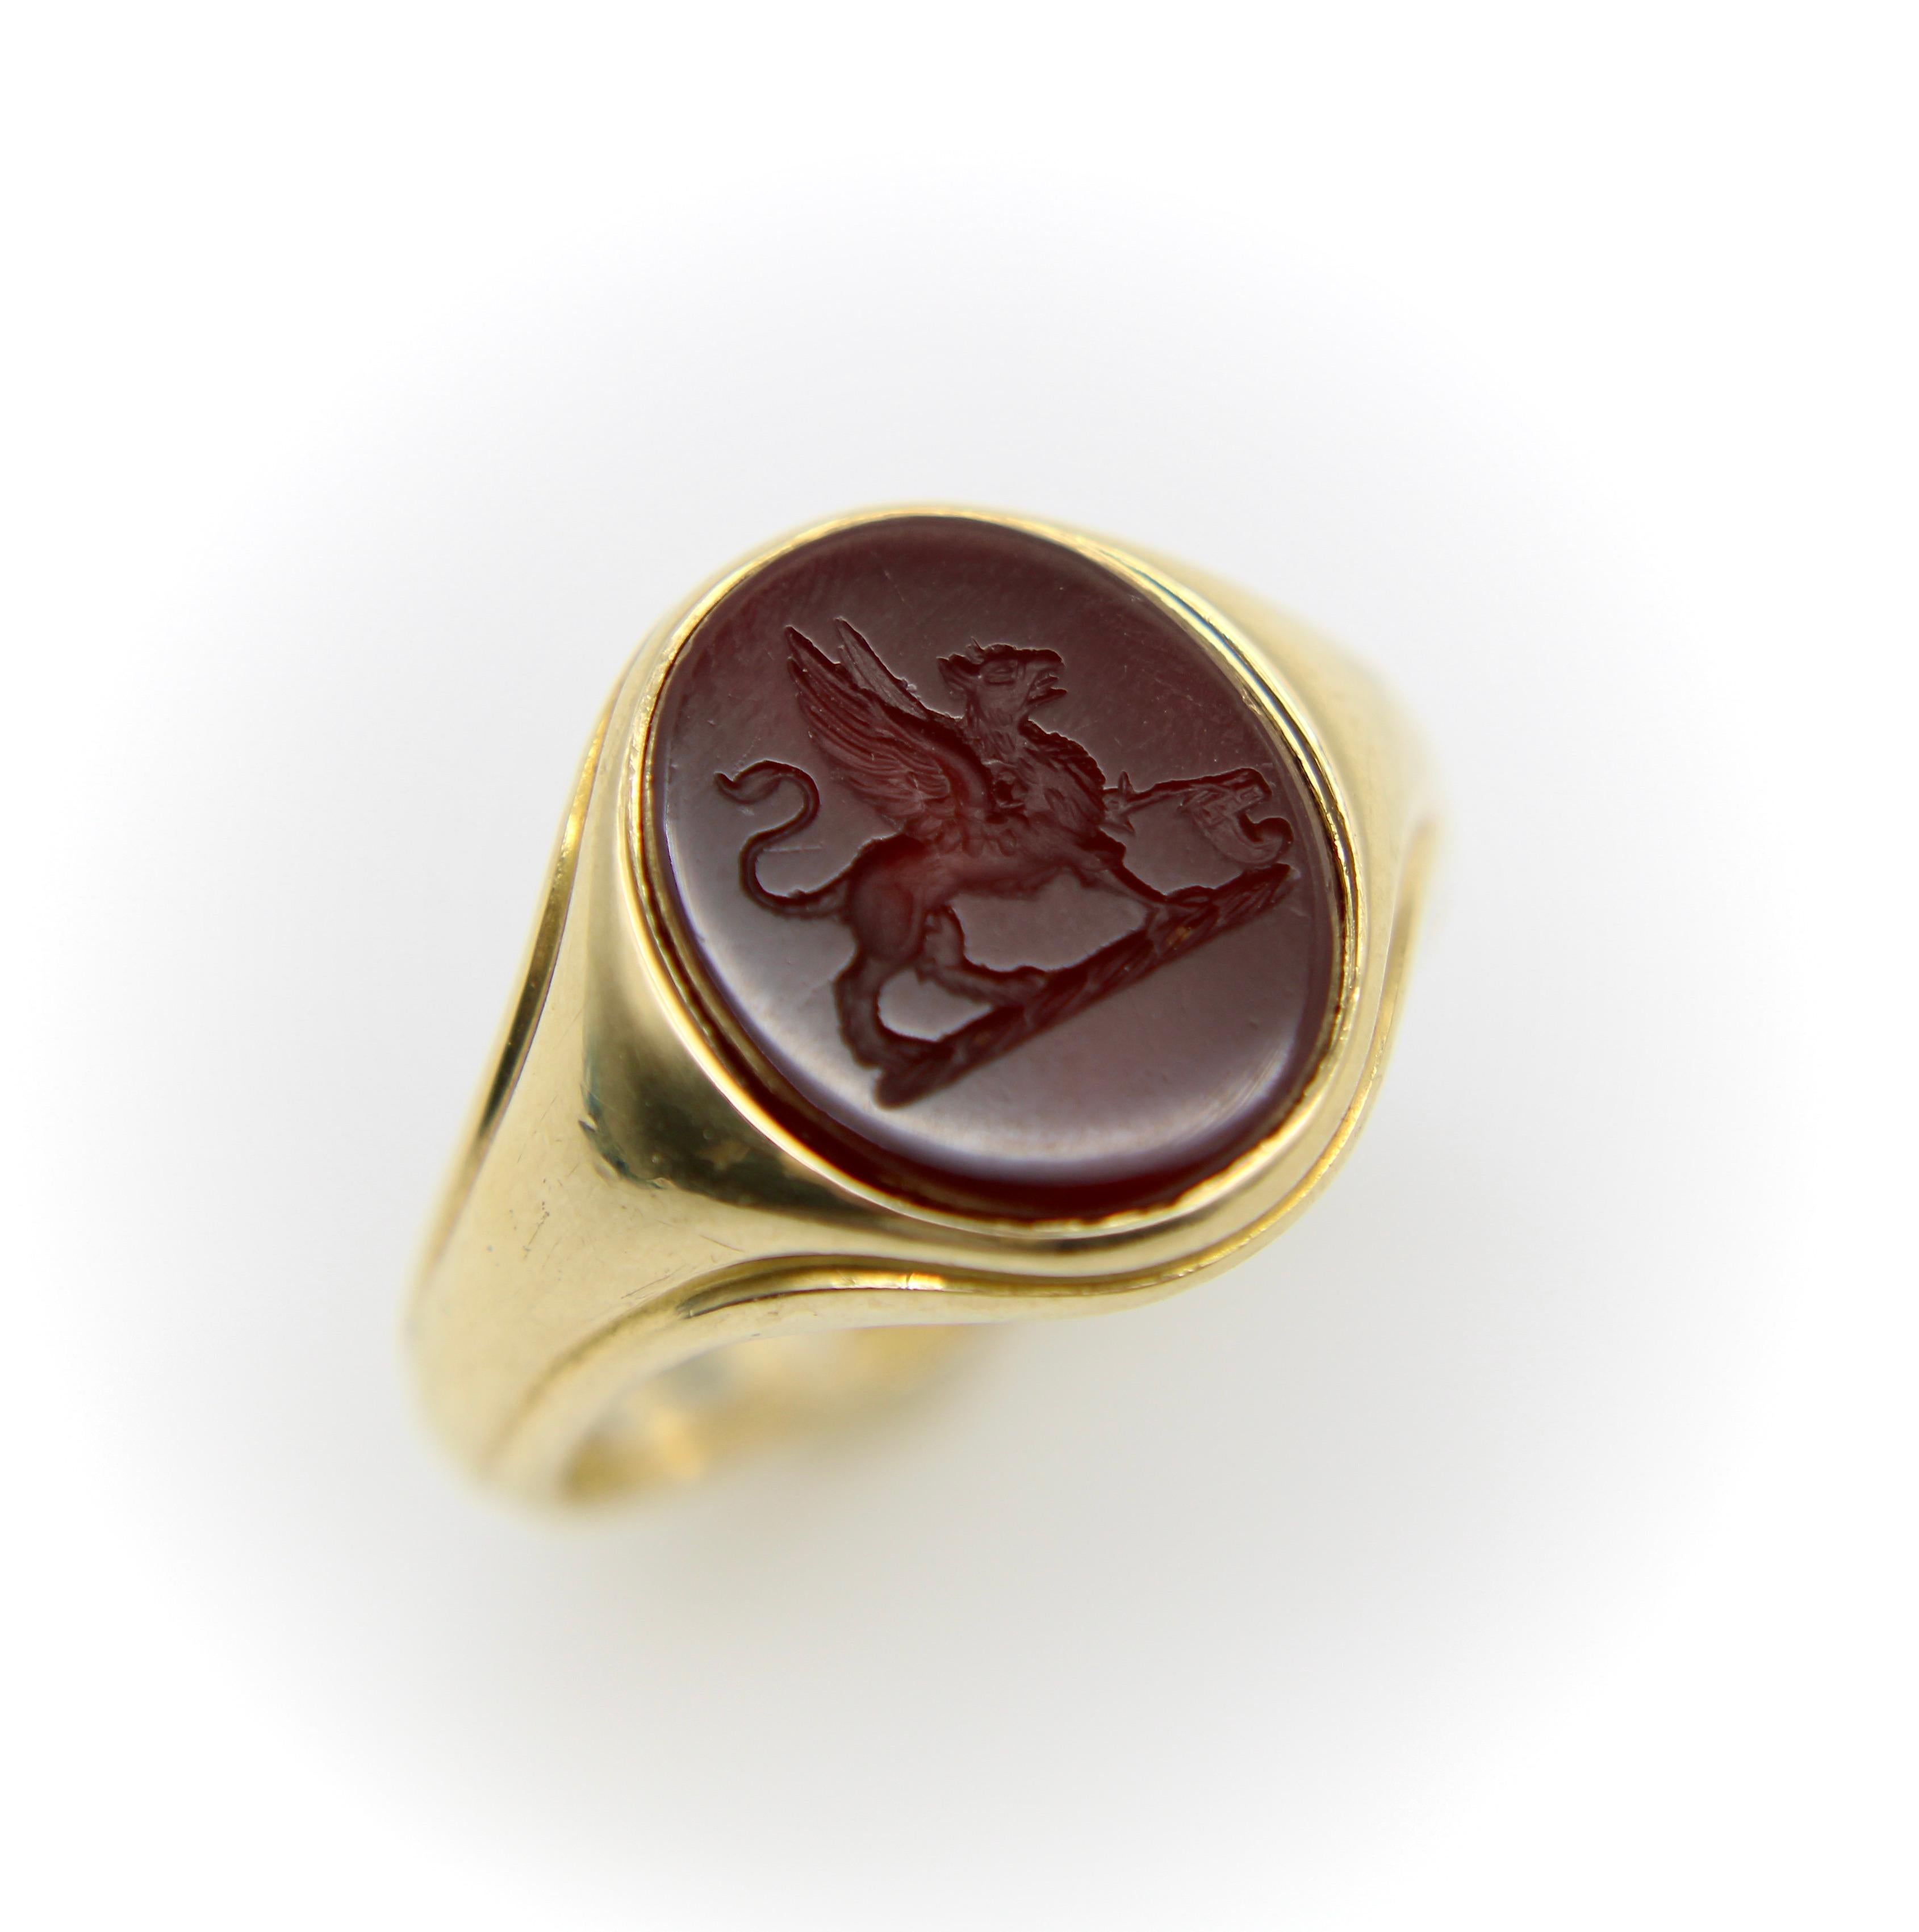 This 18k gold early Victorian intaglio ring features a griffin beautifully carved into a dark reddish brown agate. In this classic rendition of the griffin, the winged beast has a curved tail and rests its paws on the remnants of a corinthian